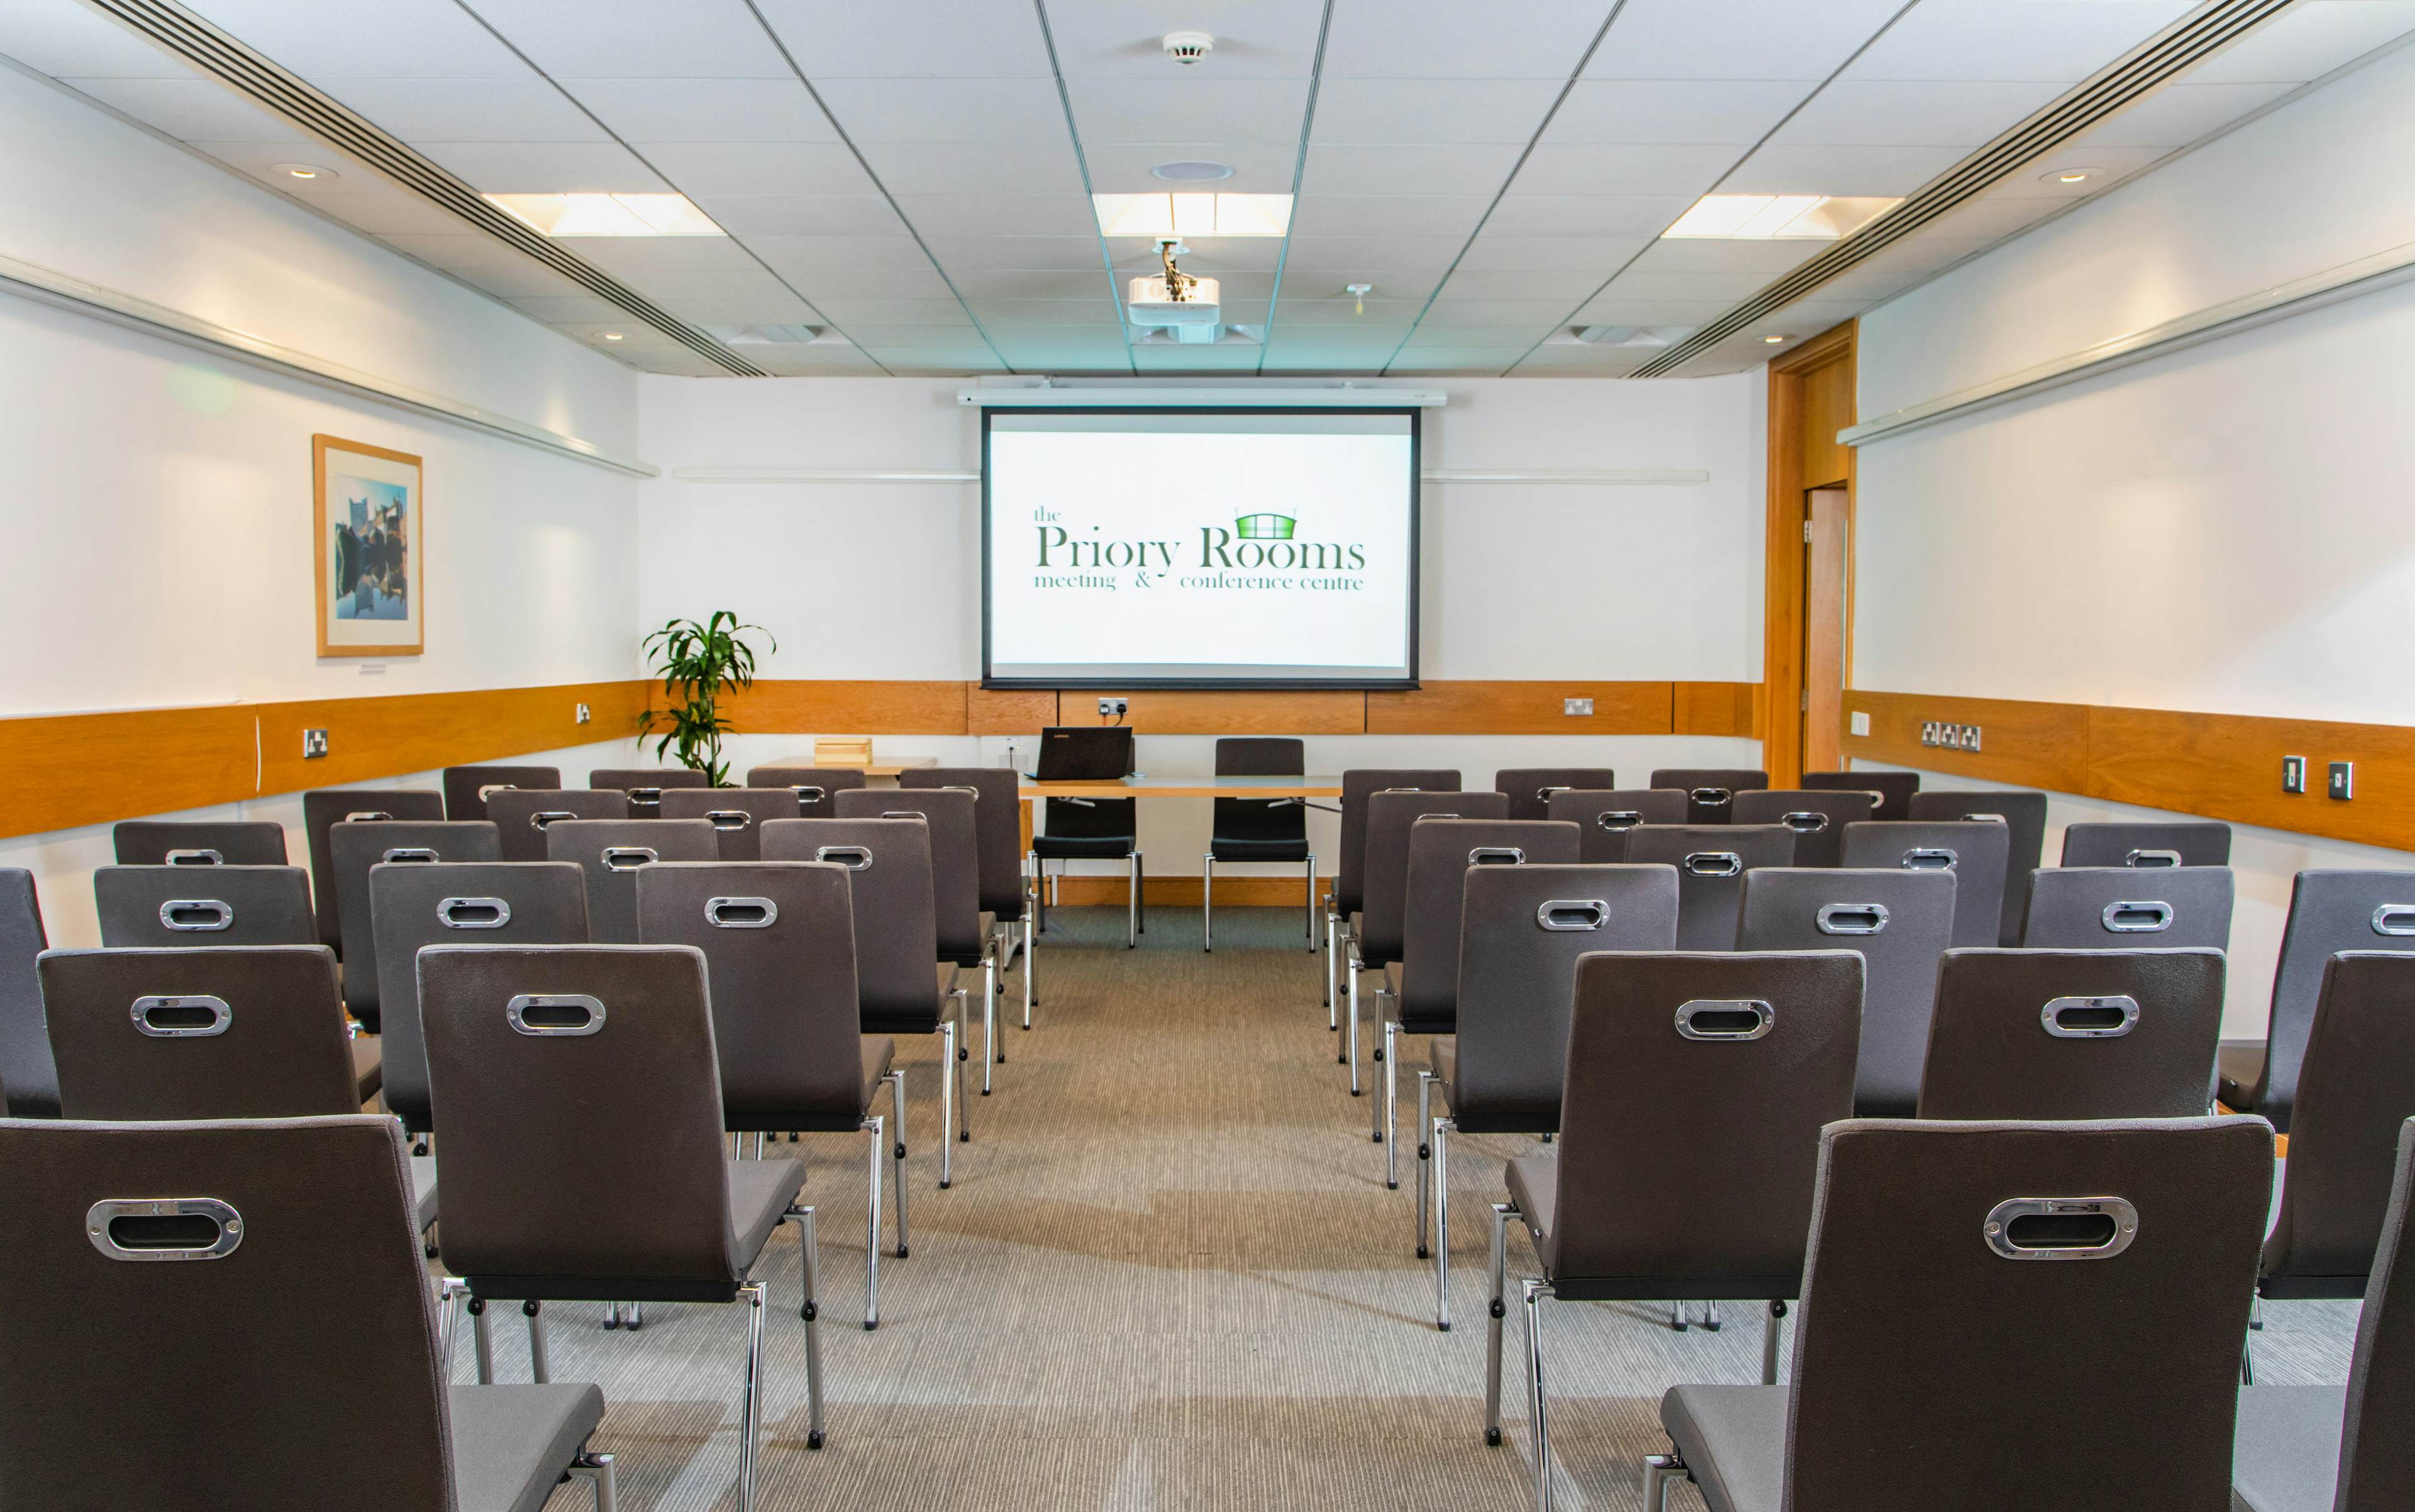 The Priory Rooms Meeting and Conference Centre  - George Fox  image 1